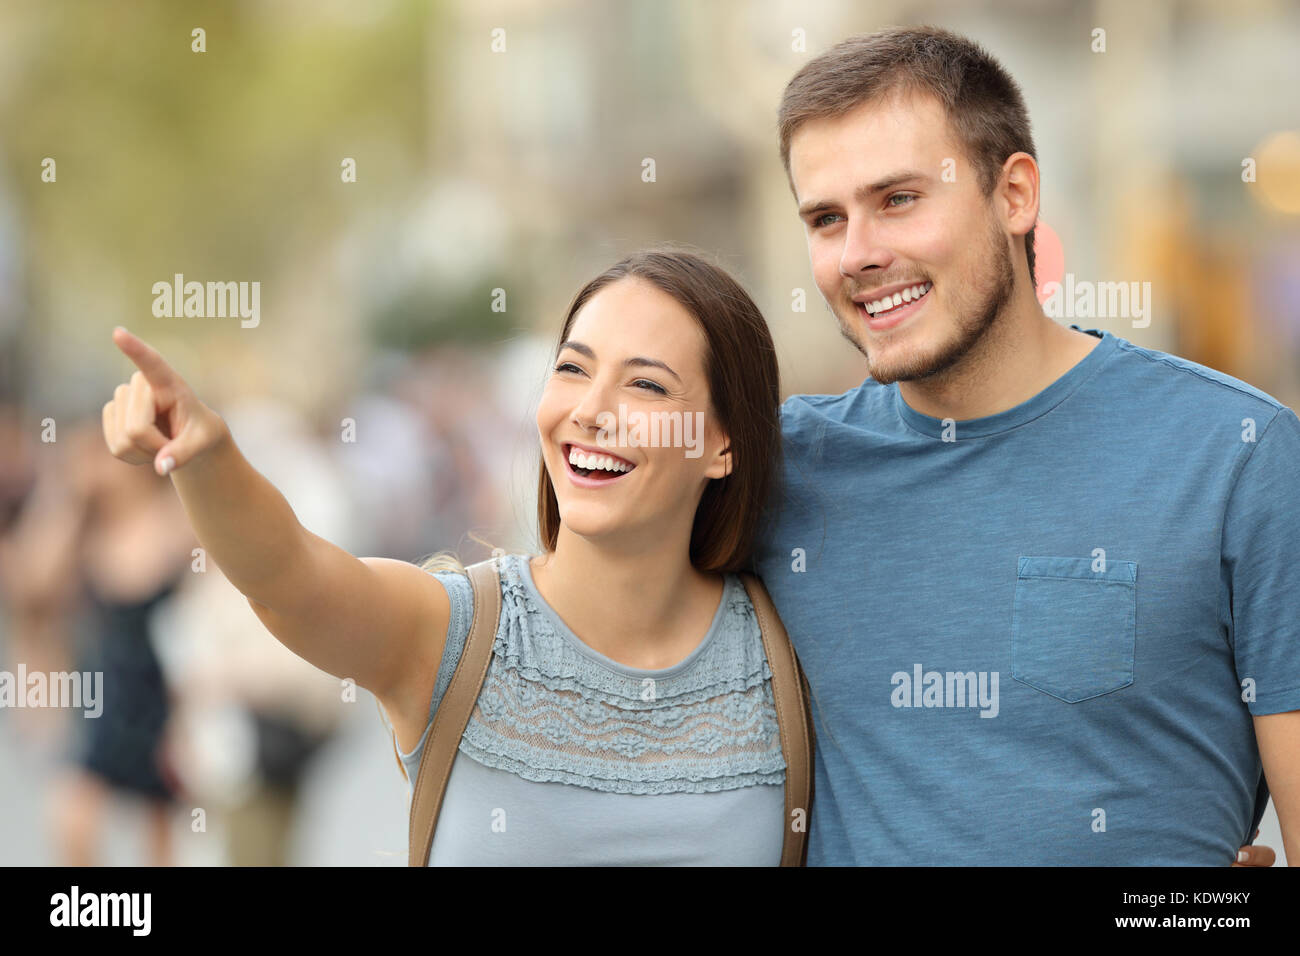 Happy couple finding location and pointing at side walking on the street Stock Photo